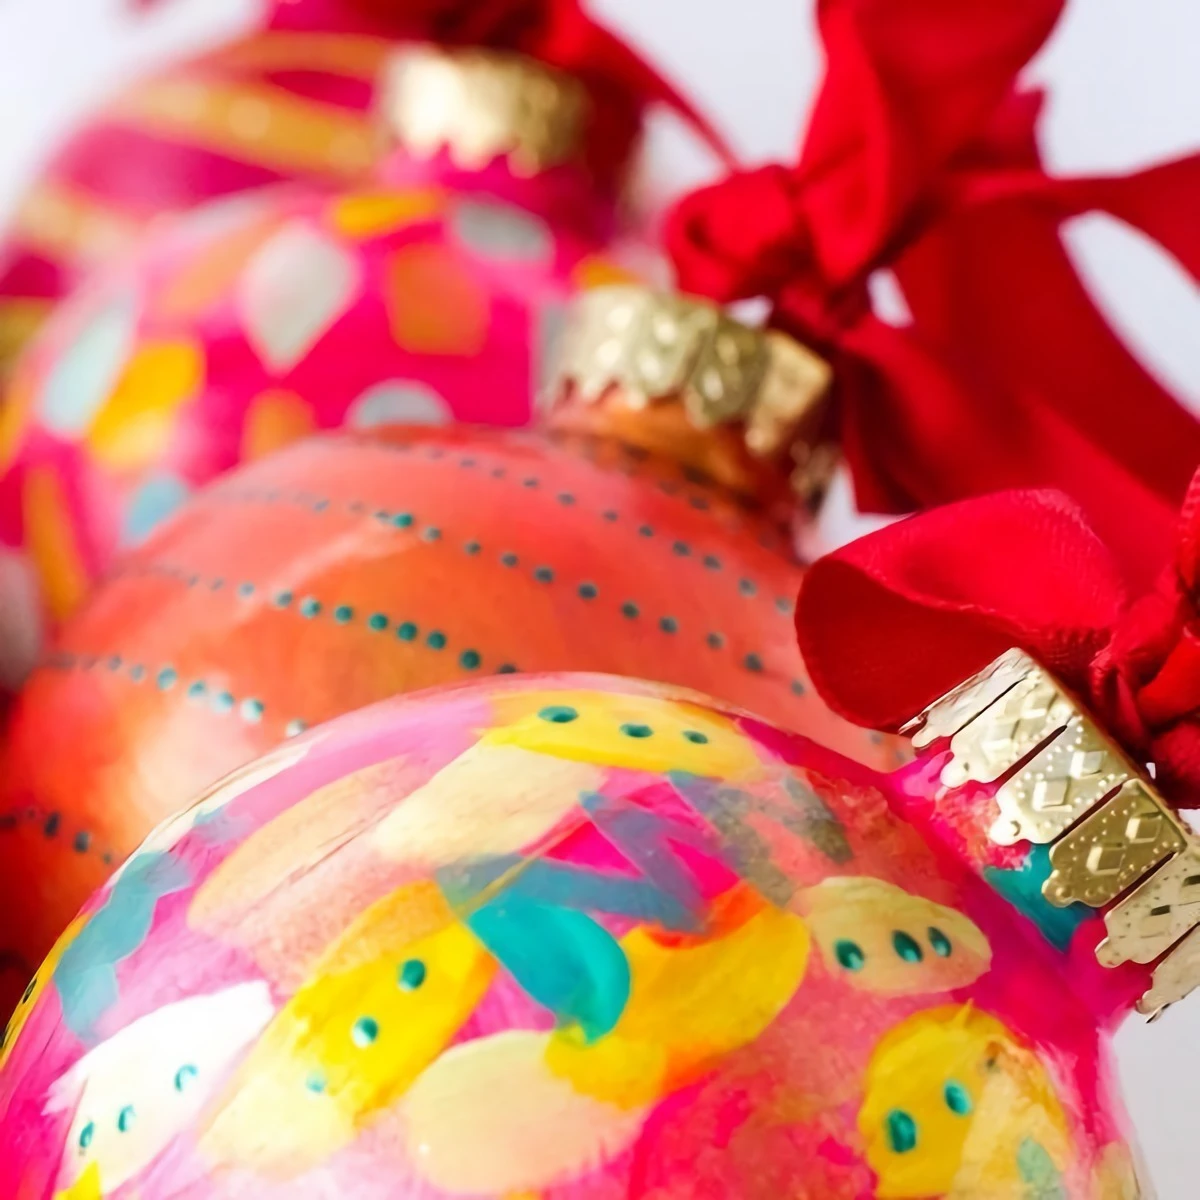 painted red and colorful ornaments